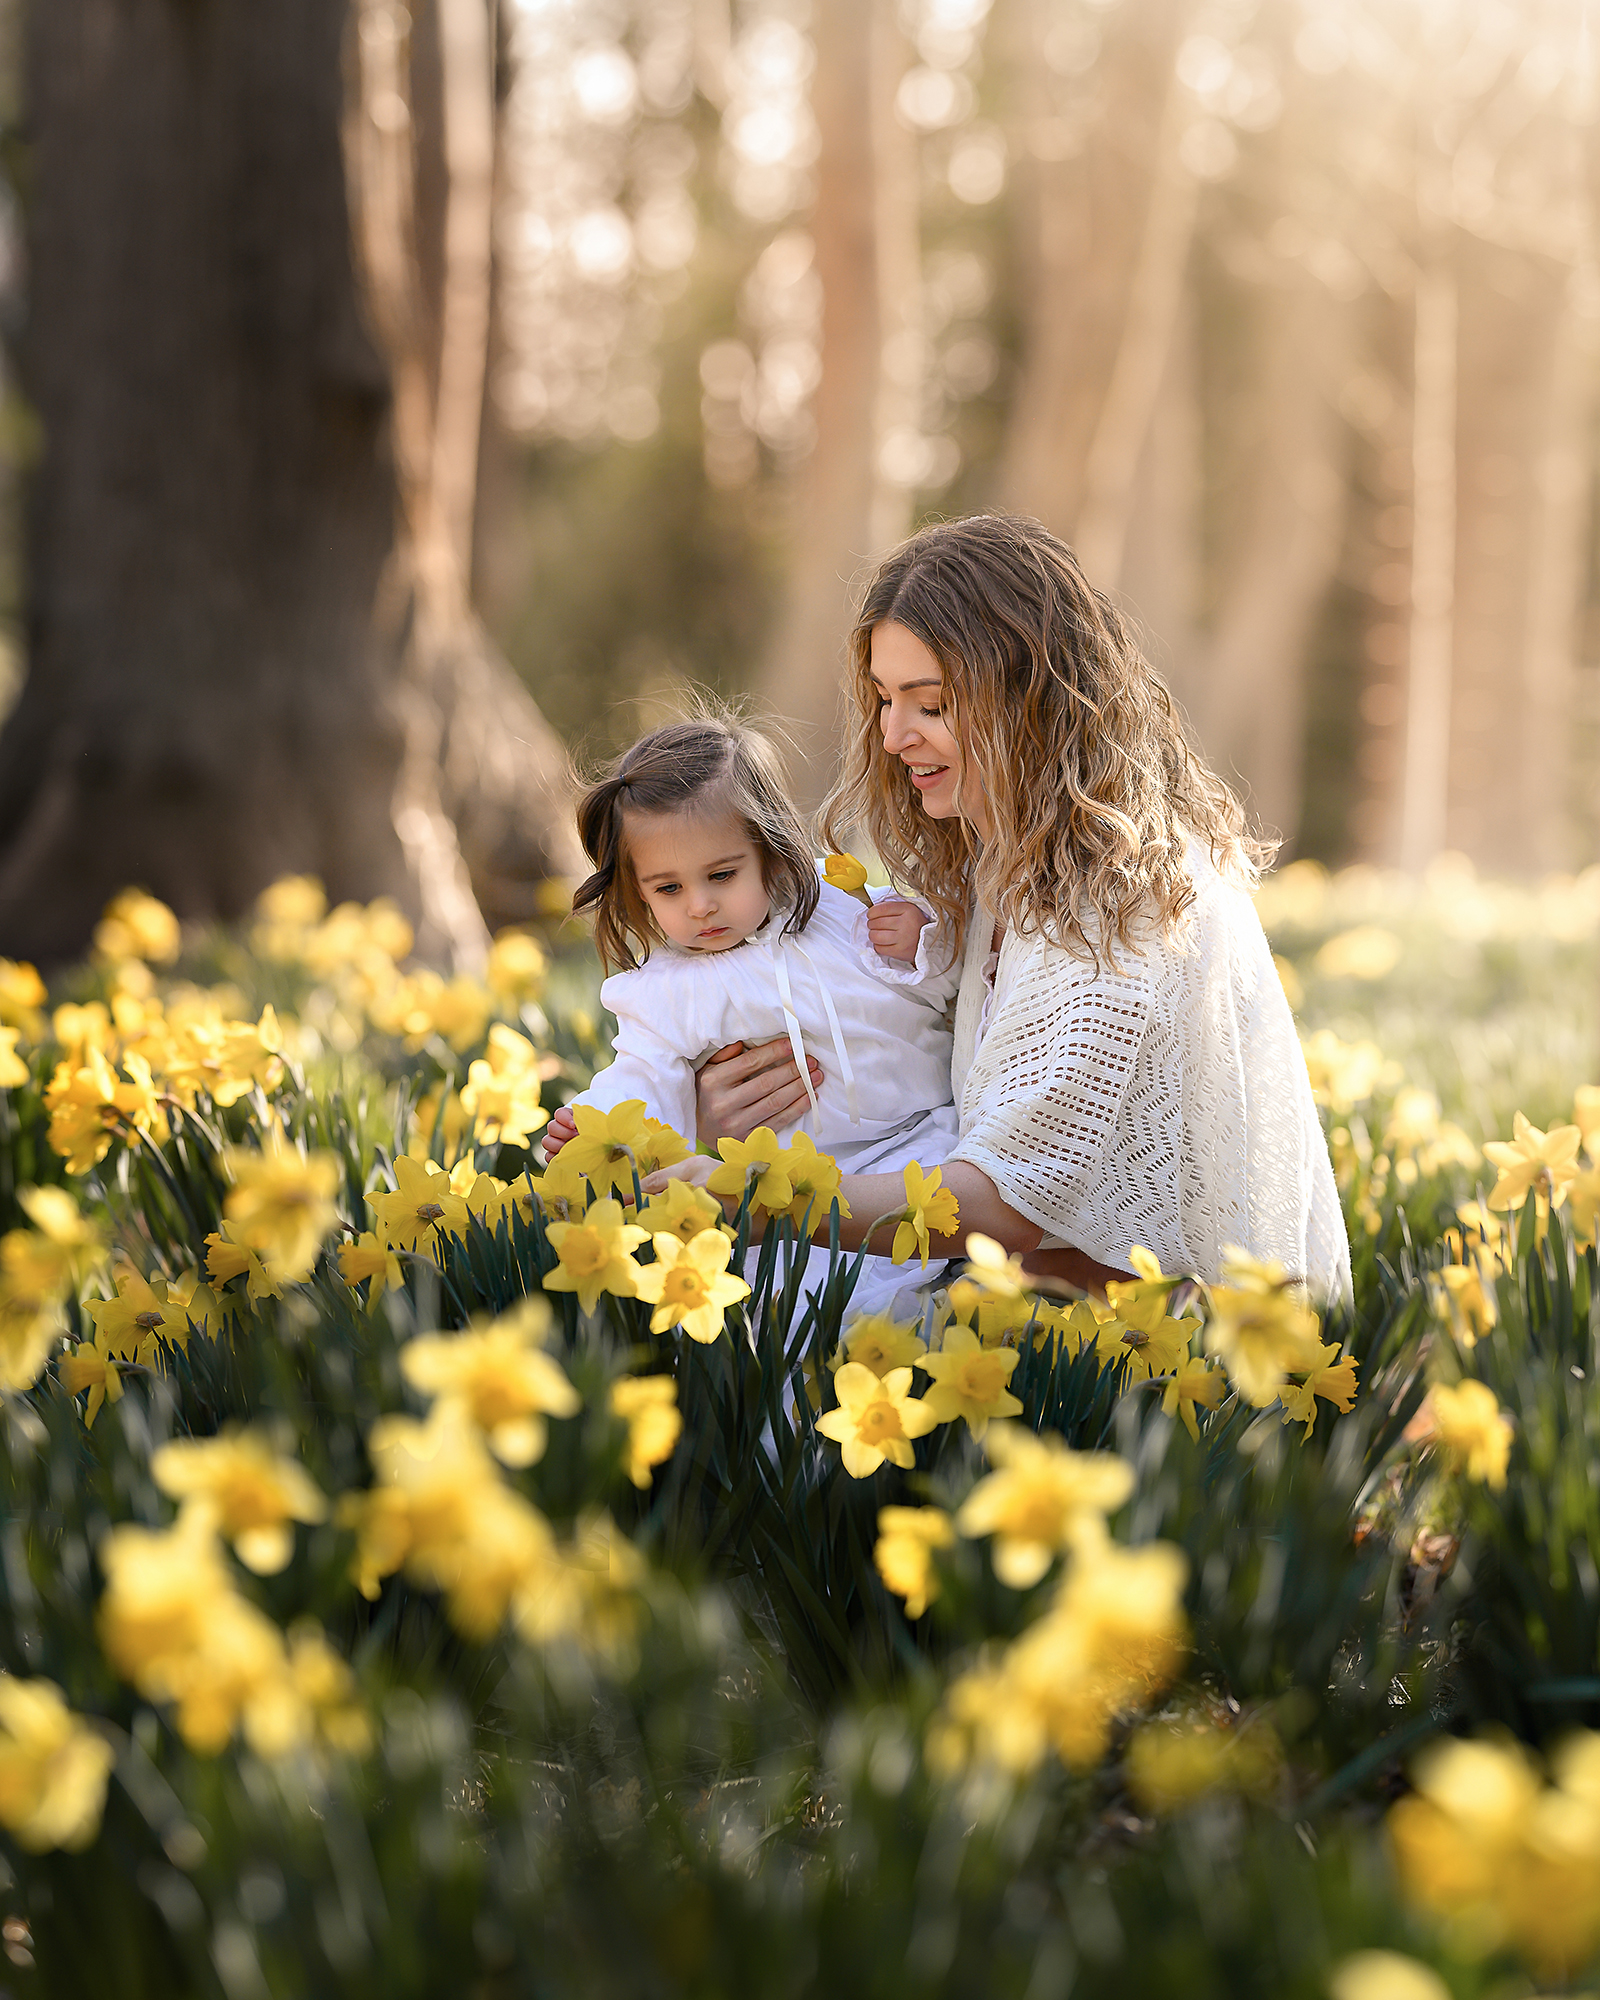 mom and daughter looking at flowers in a field